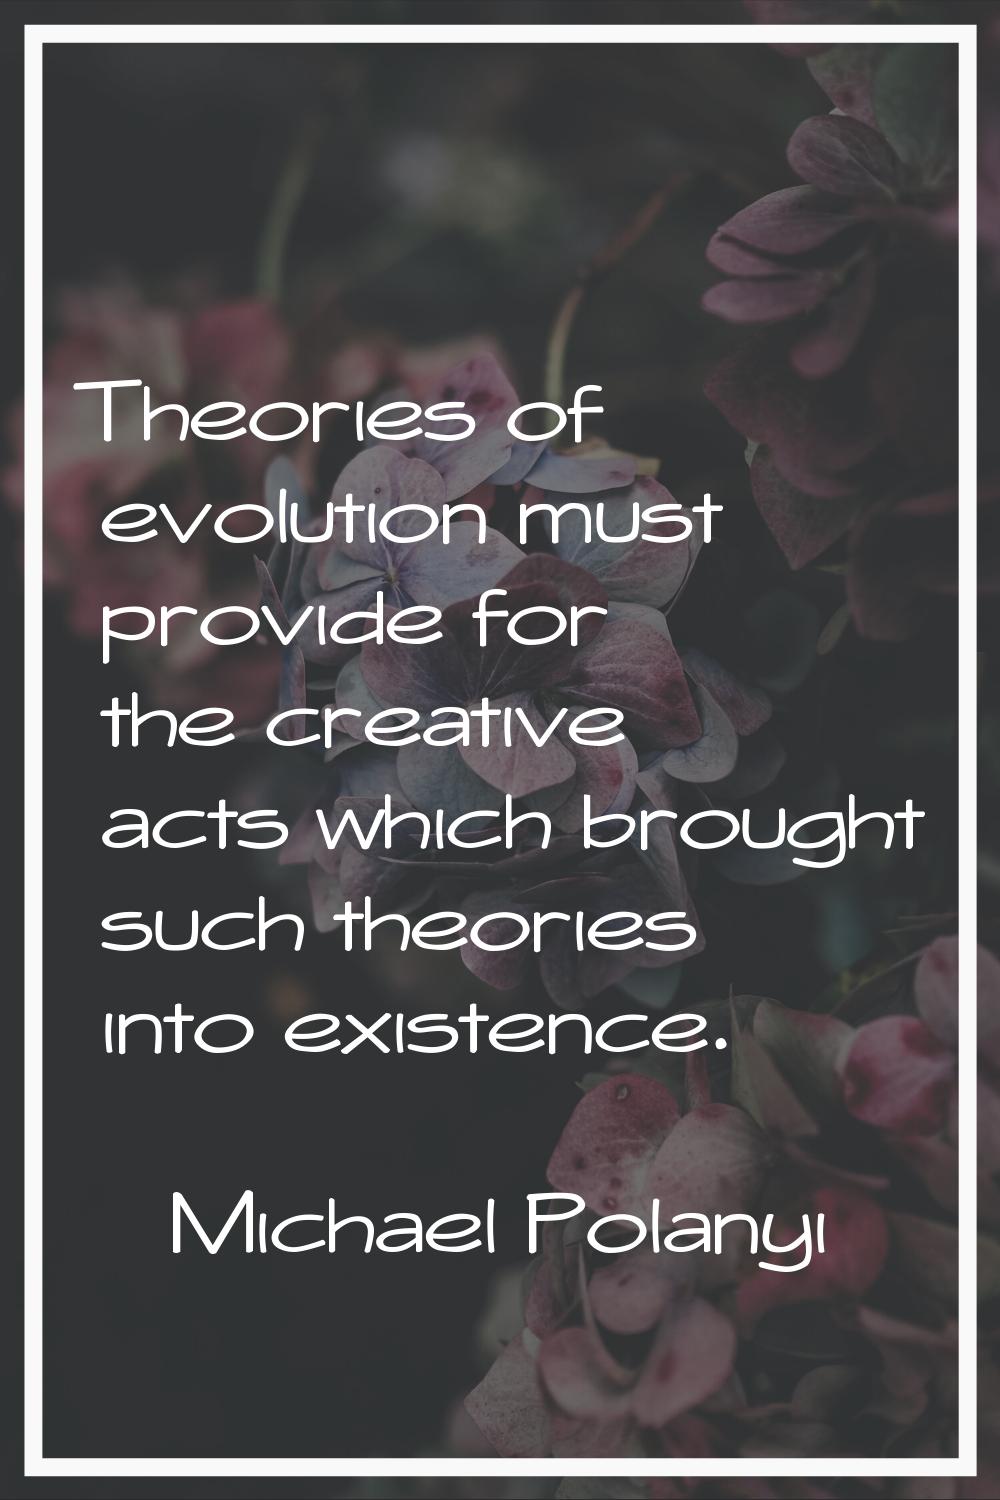 Theories of evolution must provide for the creative acts which brought such theories into existence